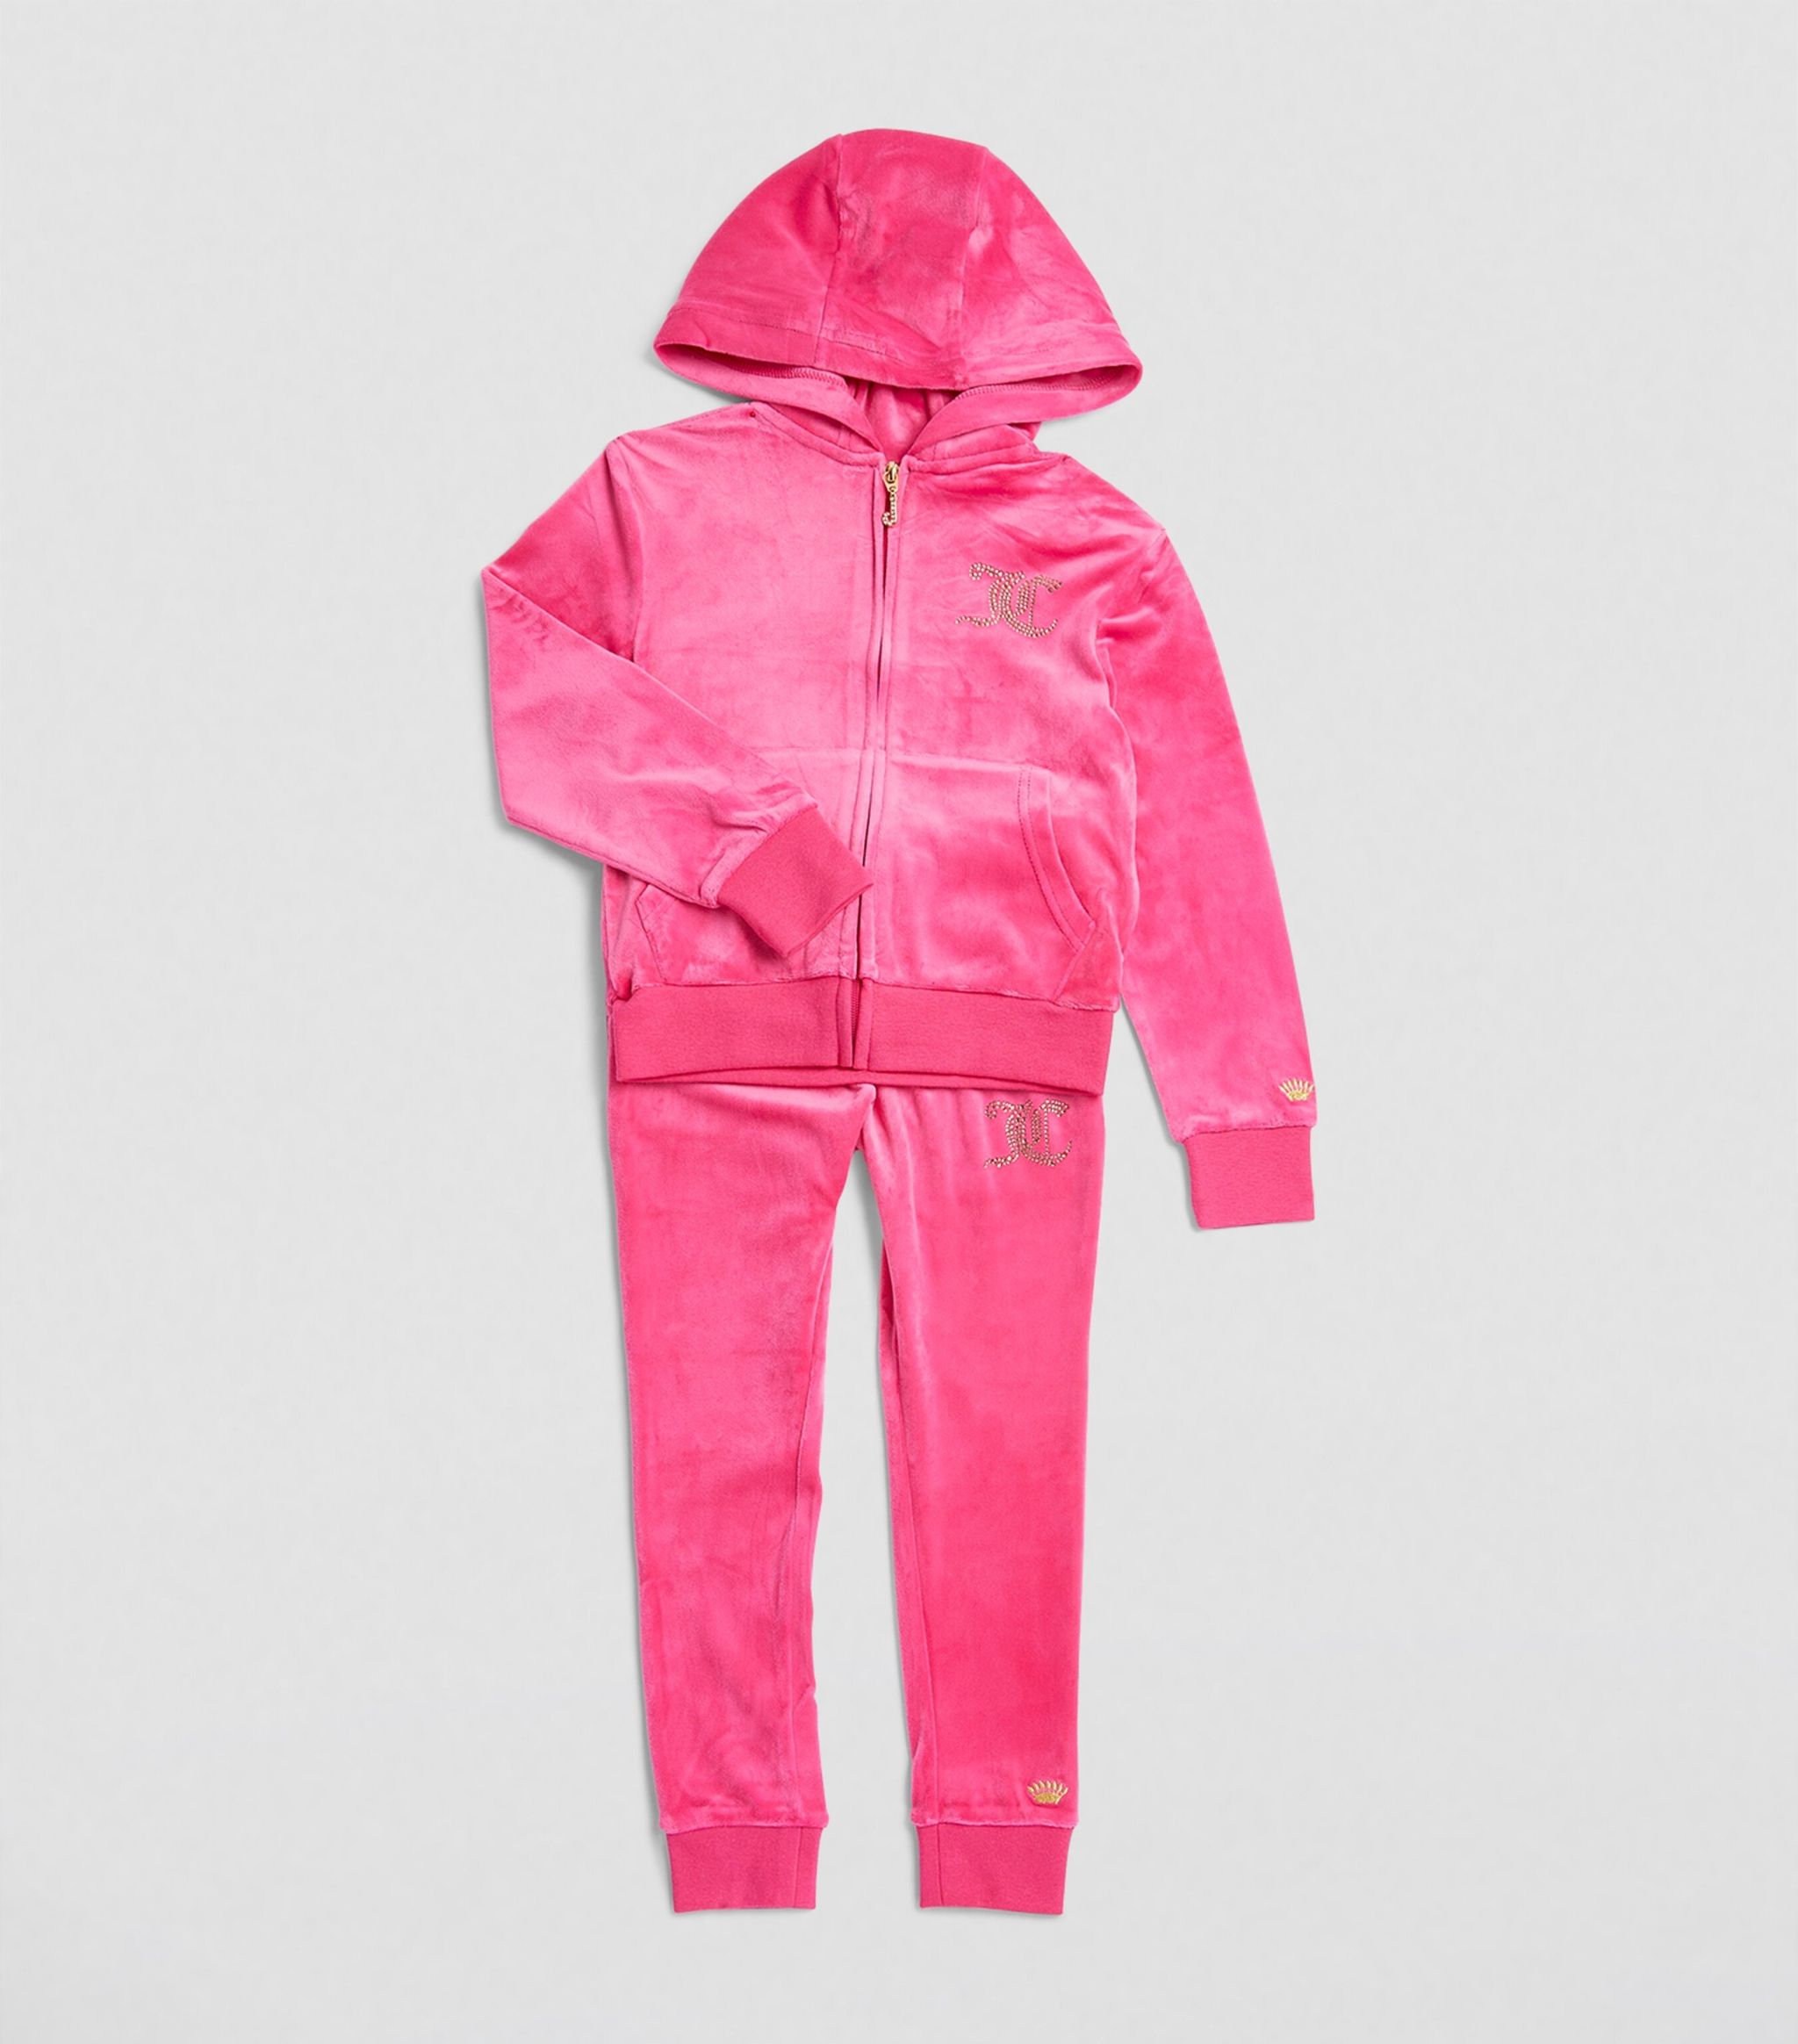 Juicy Couture Kids Suits Outlet